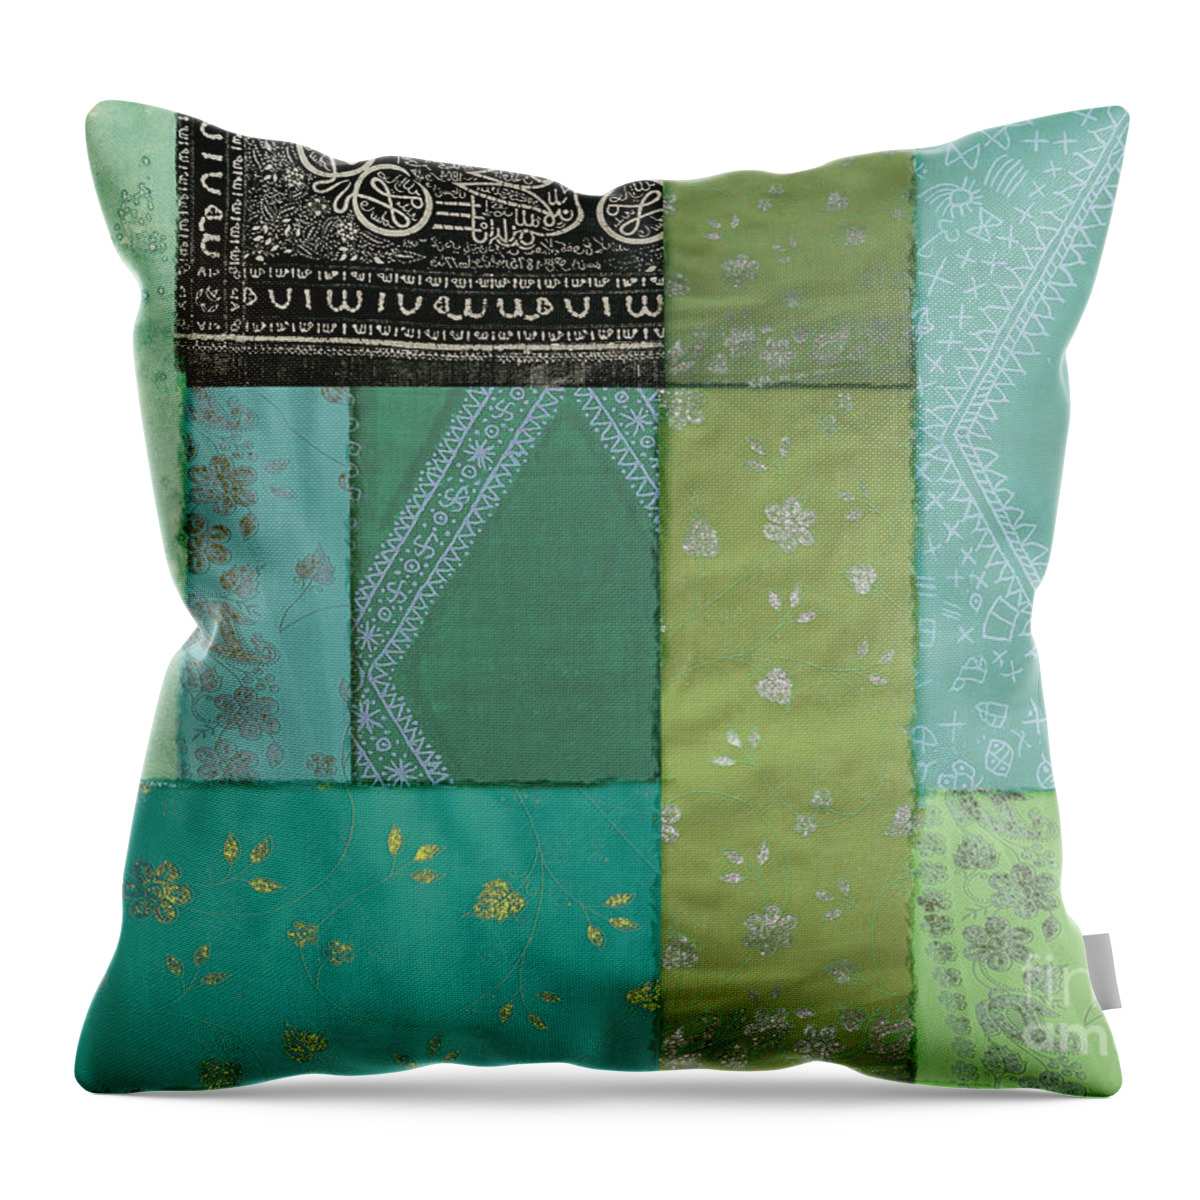 Batik Throw Pillow featuring the painting Batik Sky by Mindy Sommers